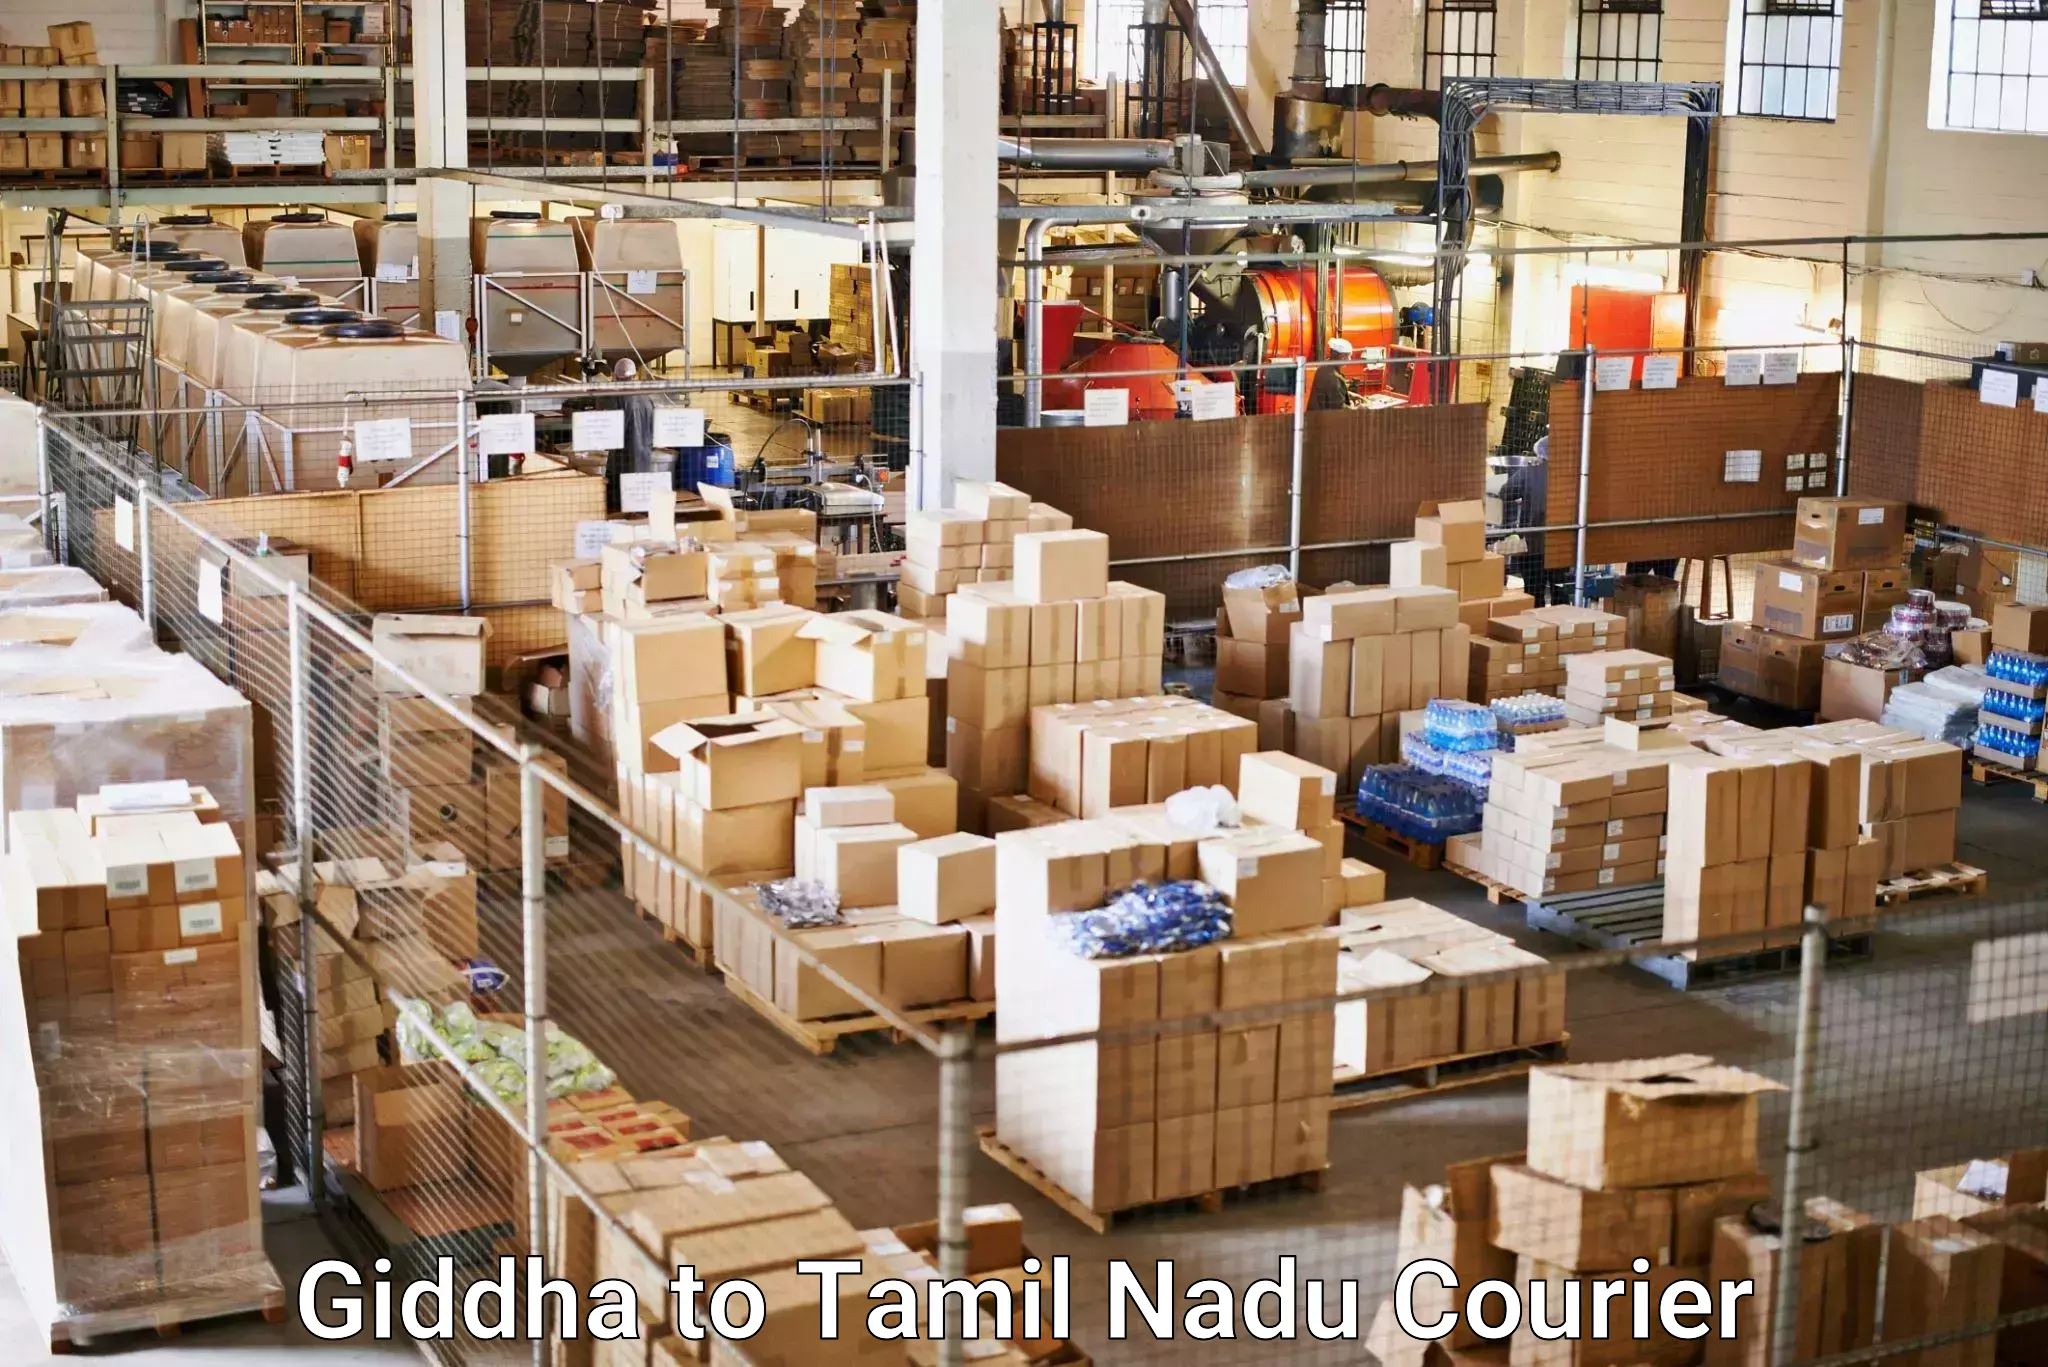 Fast delivery service Giddha to Tamil Nadu